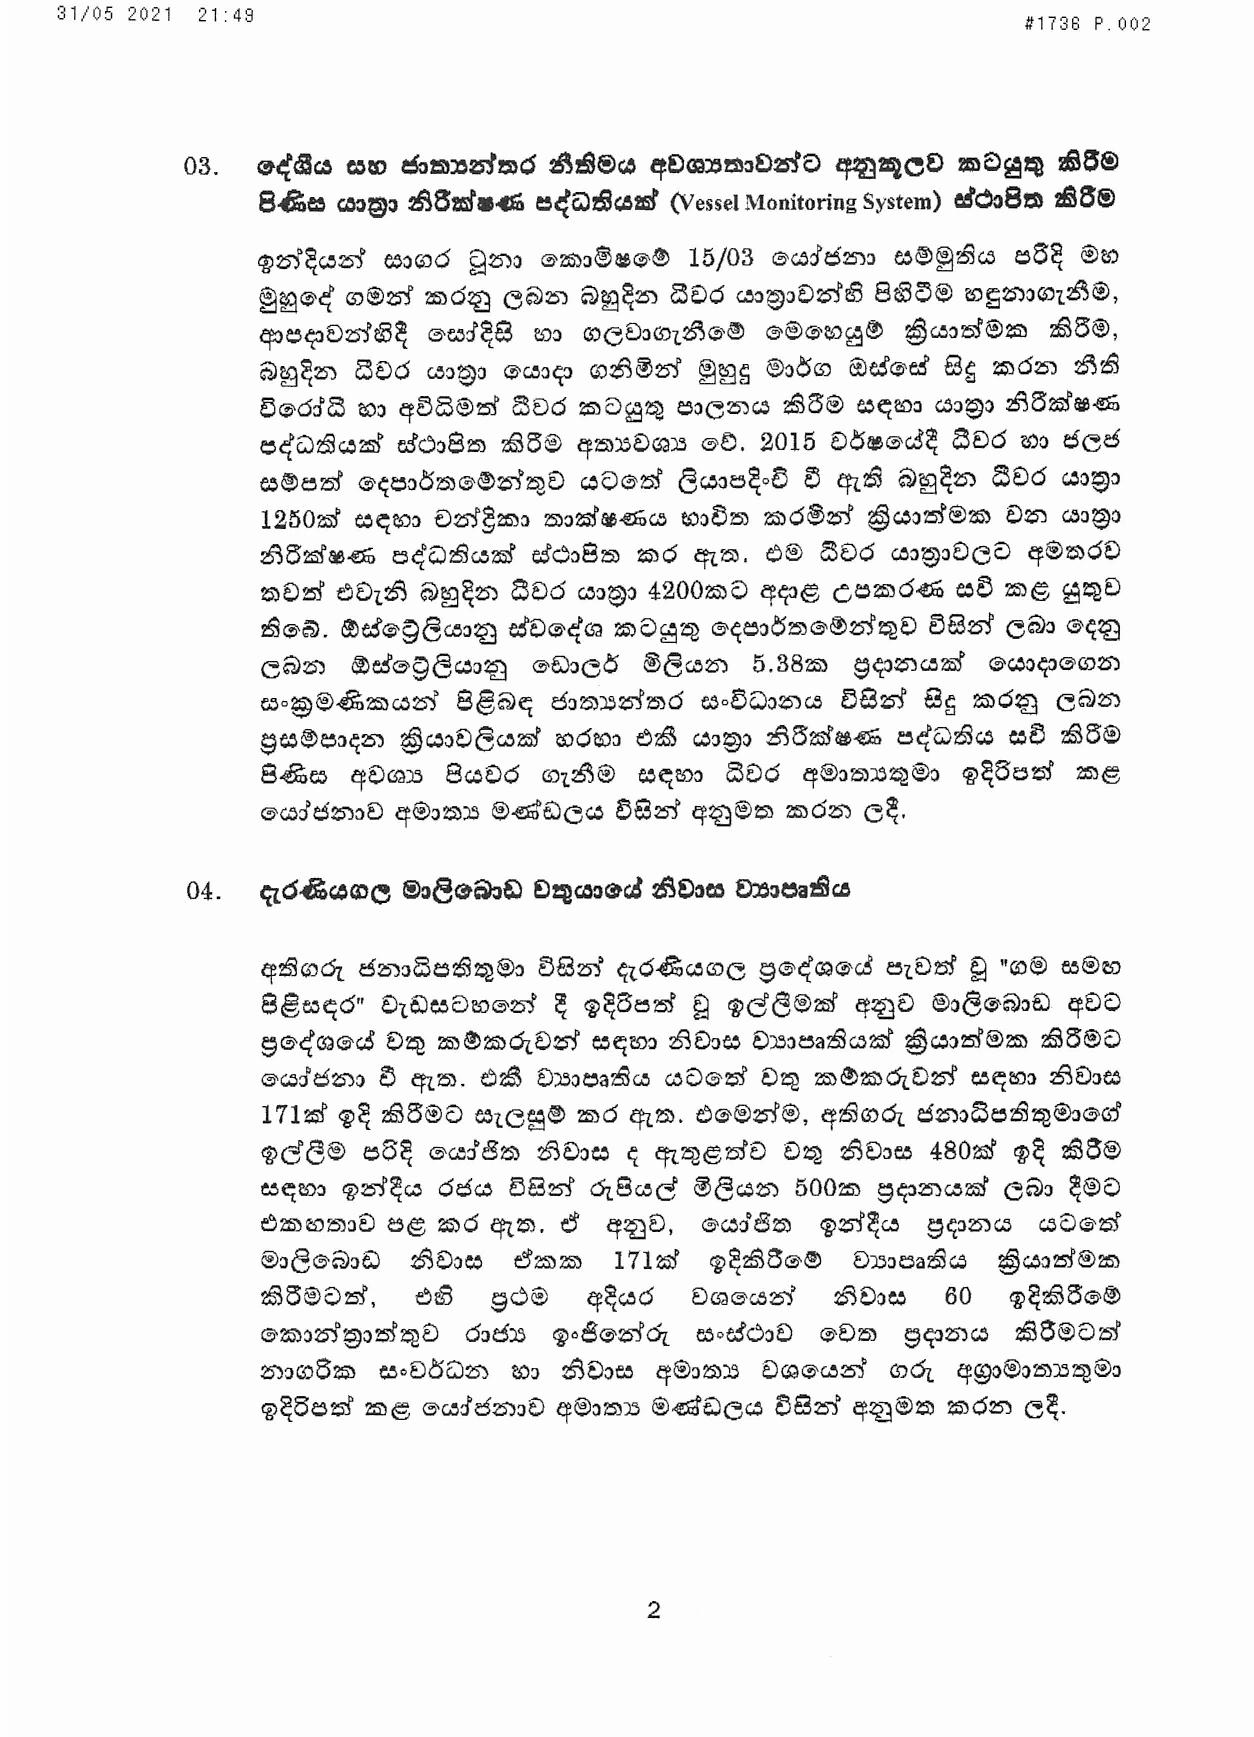 Cabinet Decision on 31.05.2021 page 002